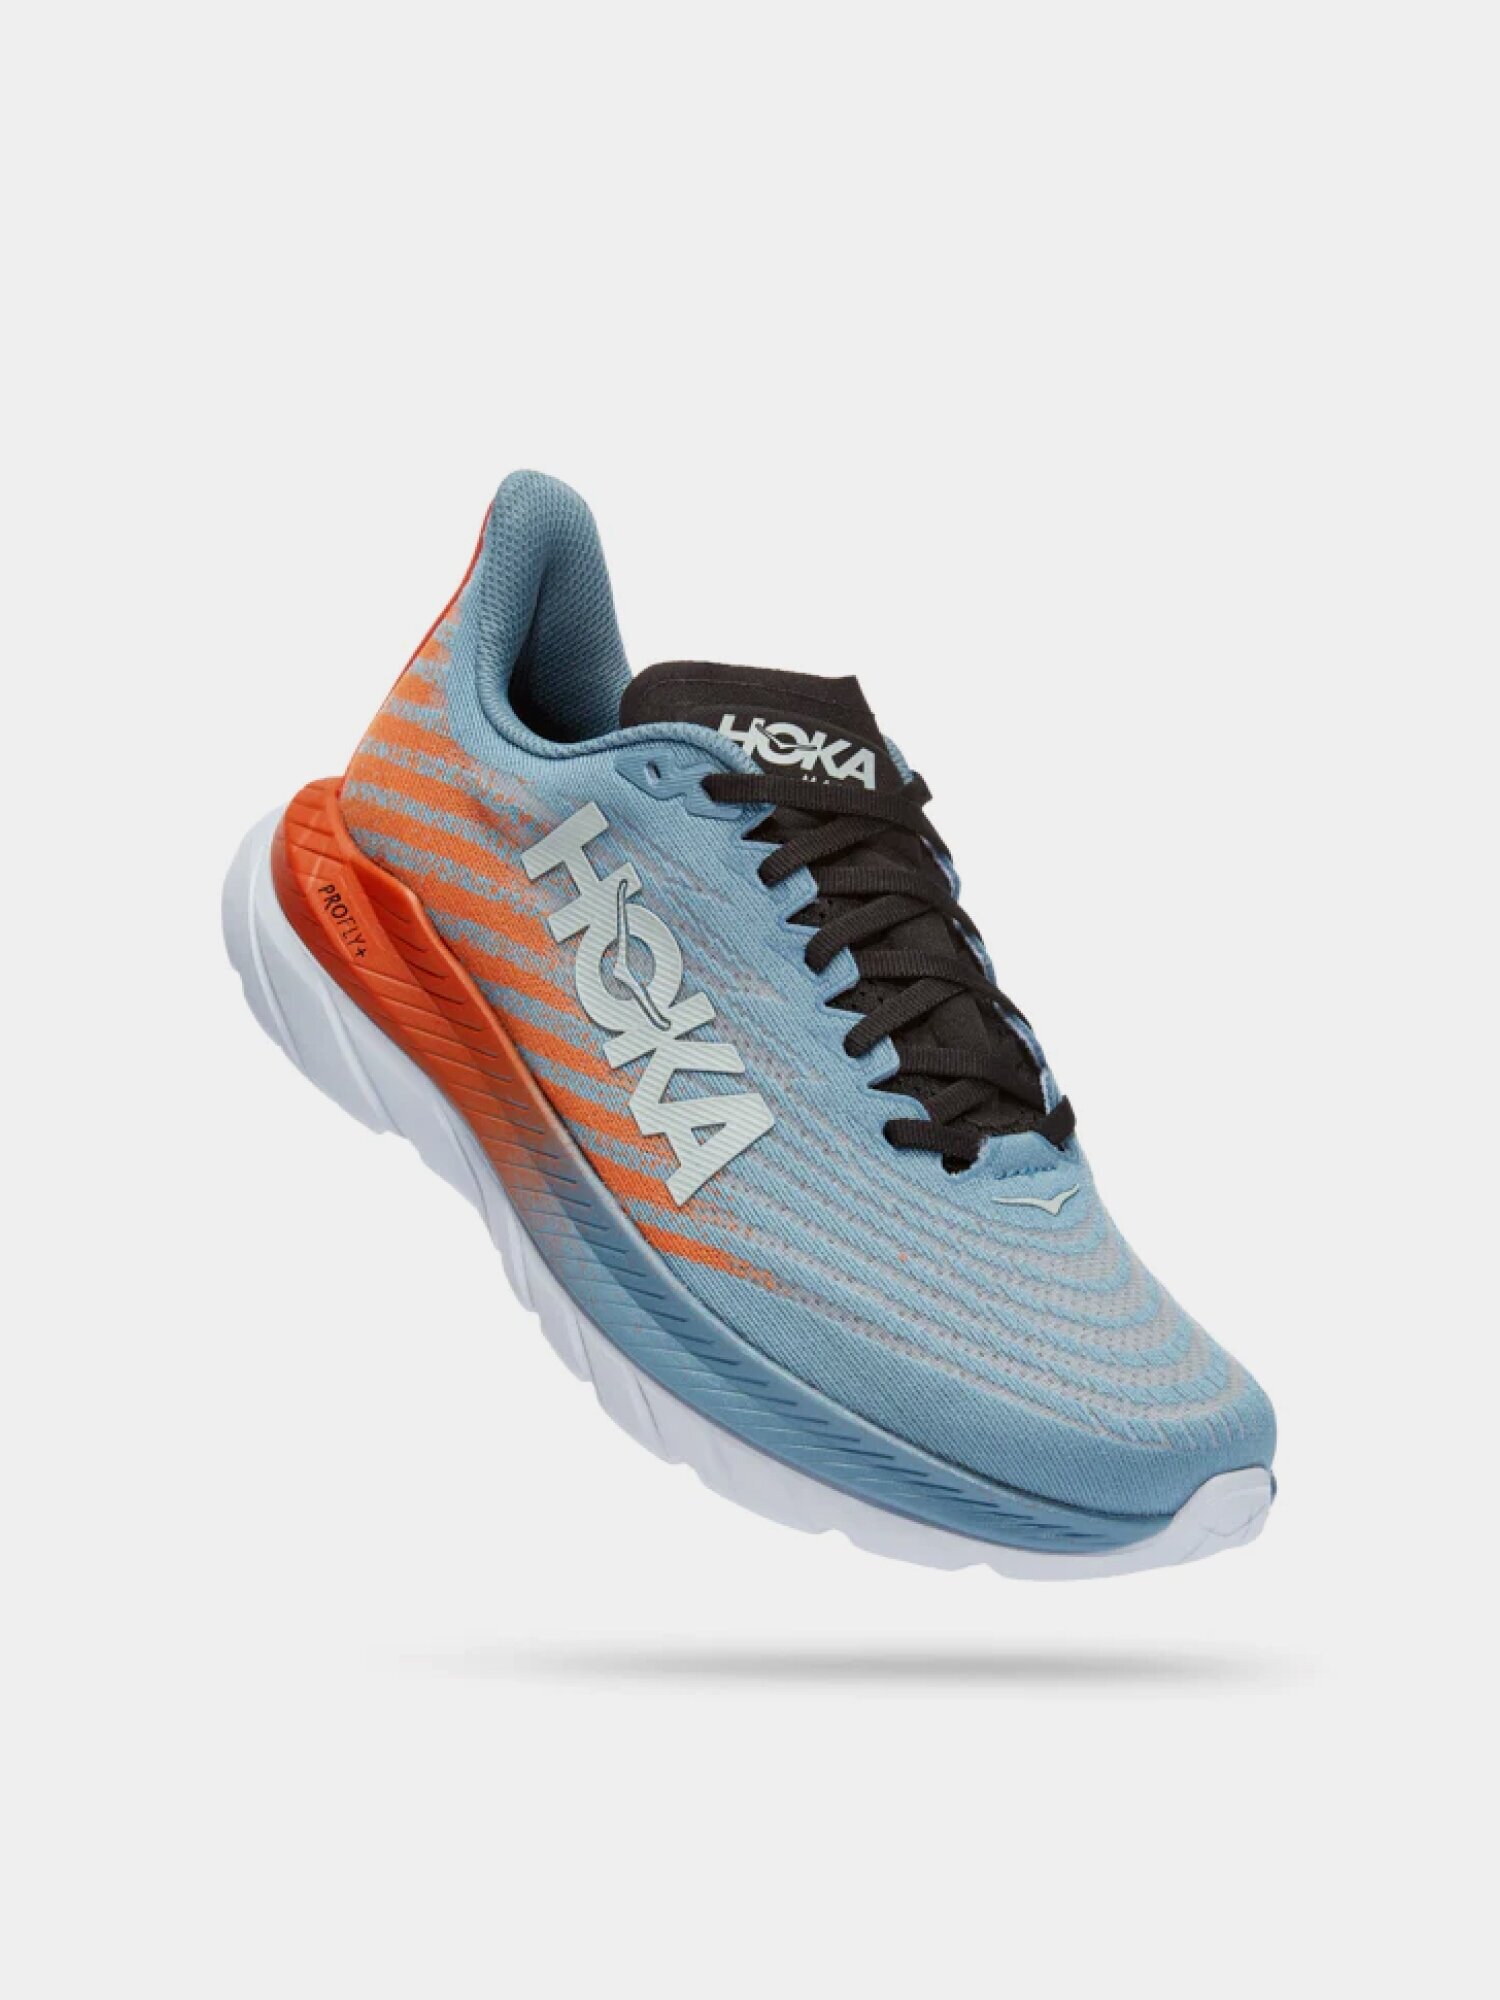 Gear Up for Sexy Running with Hoka Mach 5 – The Ultimate Running Shoe for Maximum Impact!